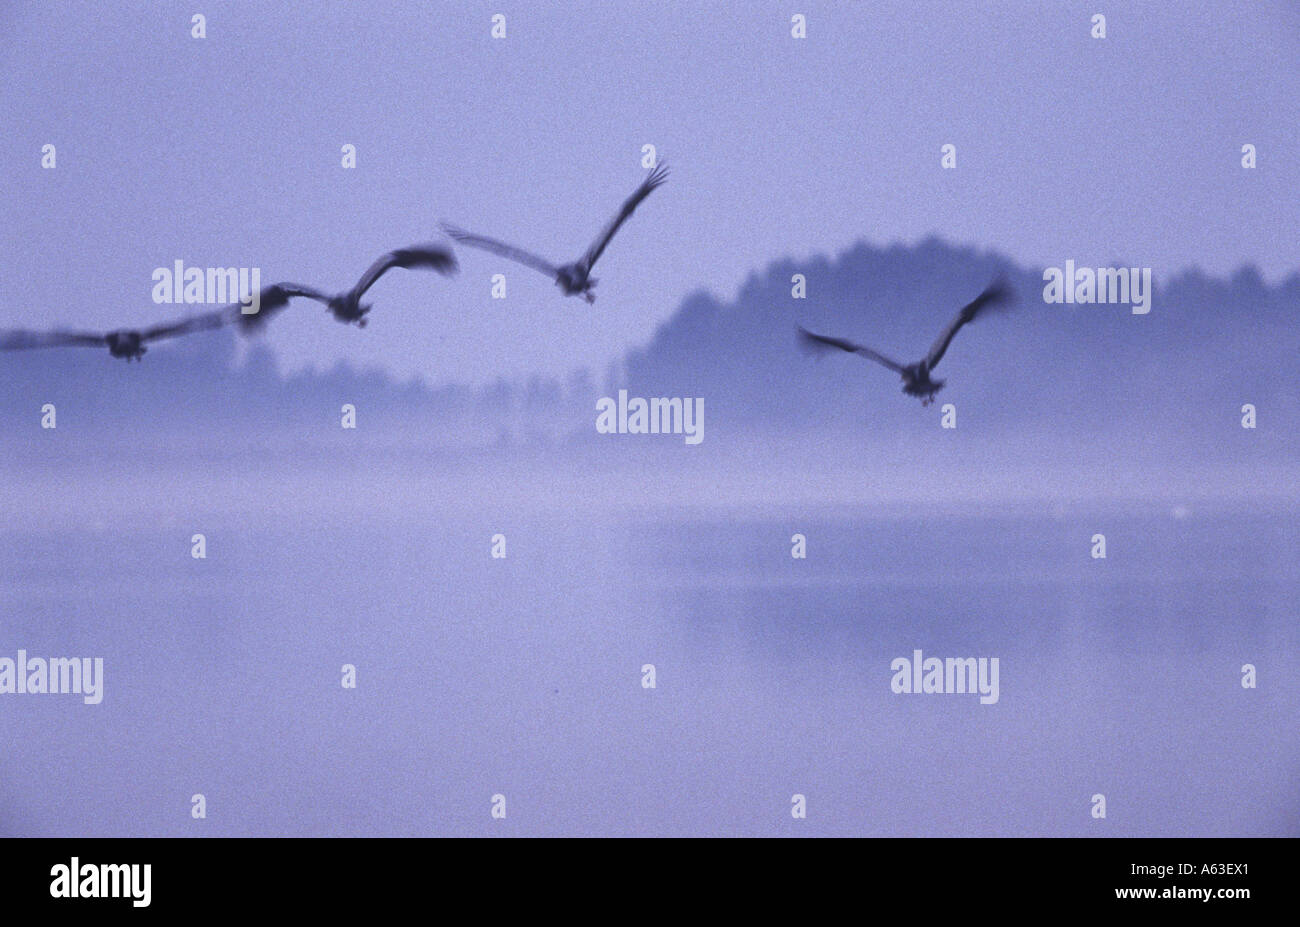 Silhouette of geese flying over lake Stock Photo